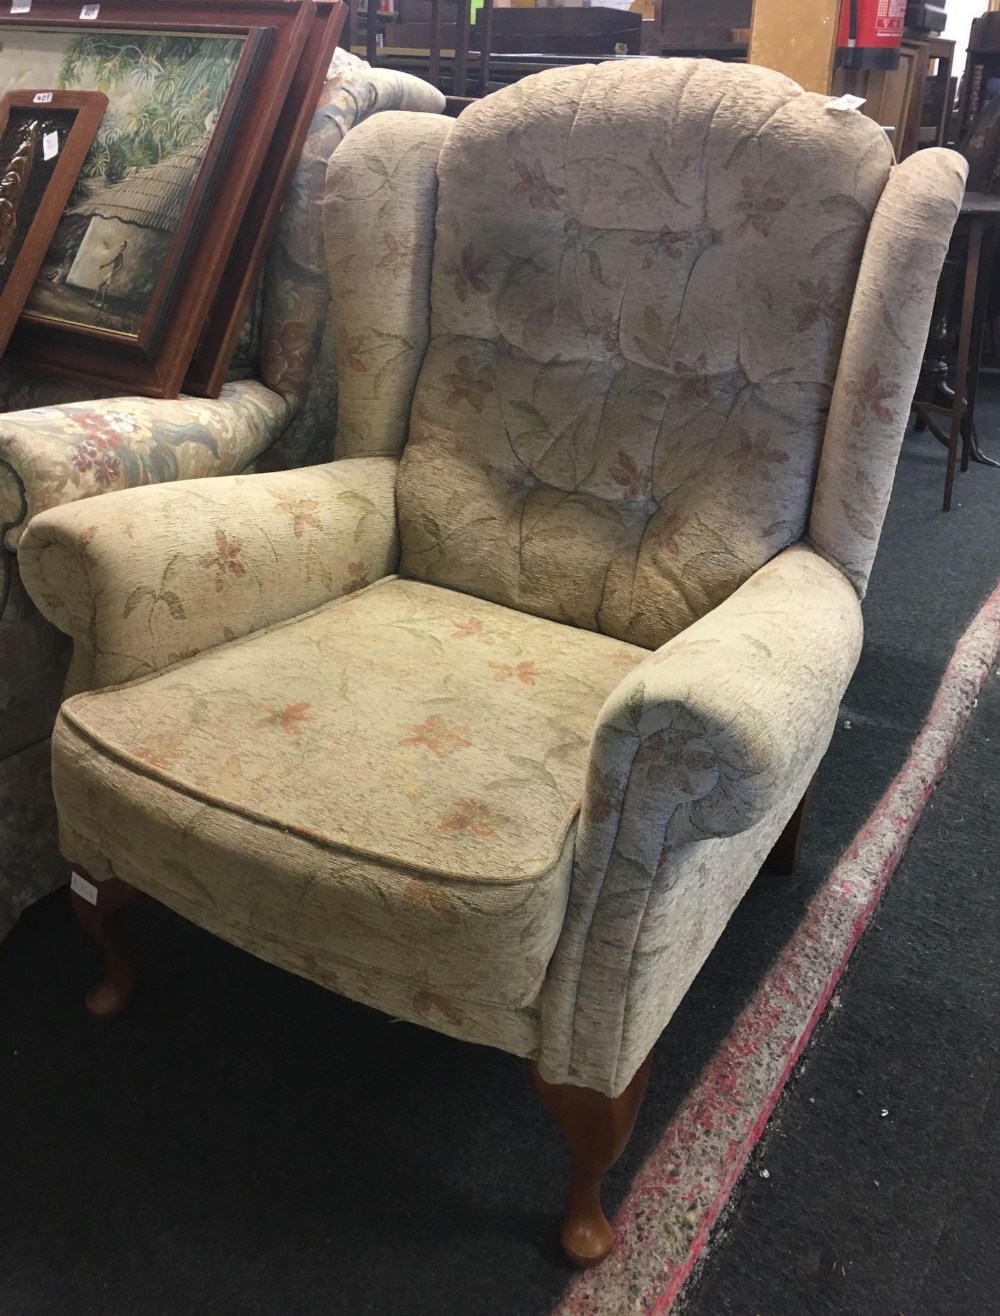 FLORAL PATTERNED ARMCHAIR